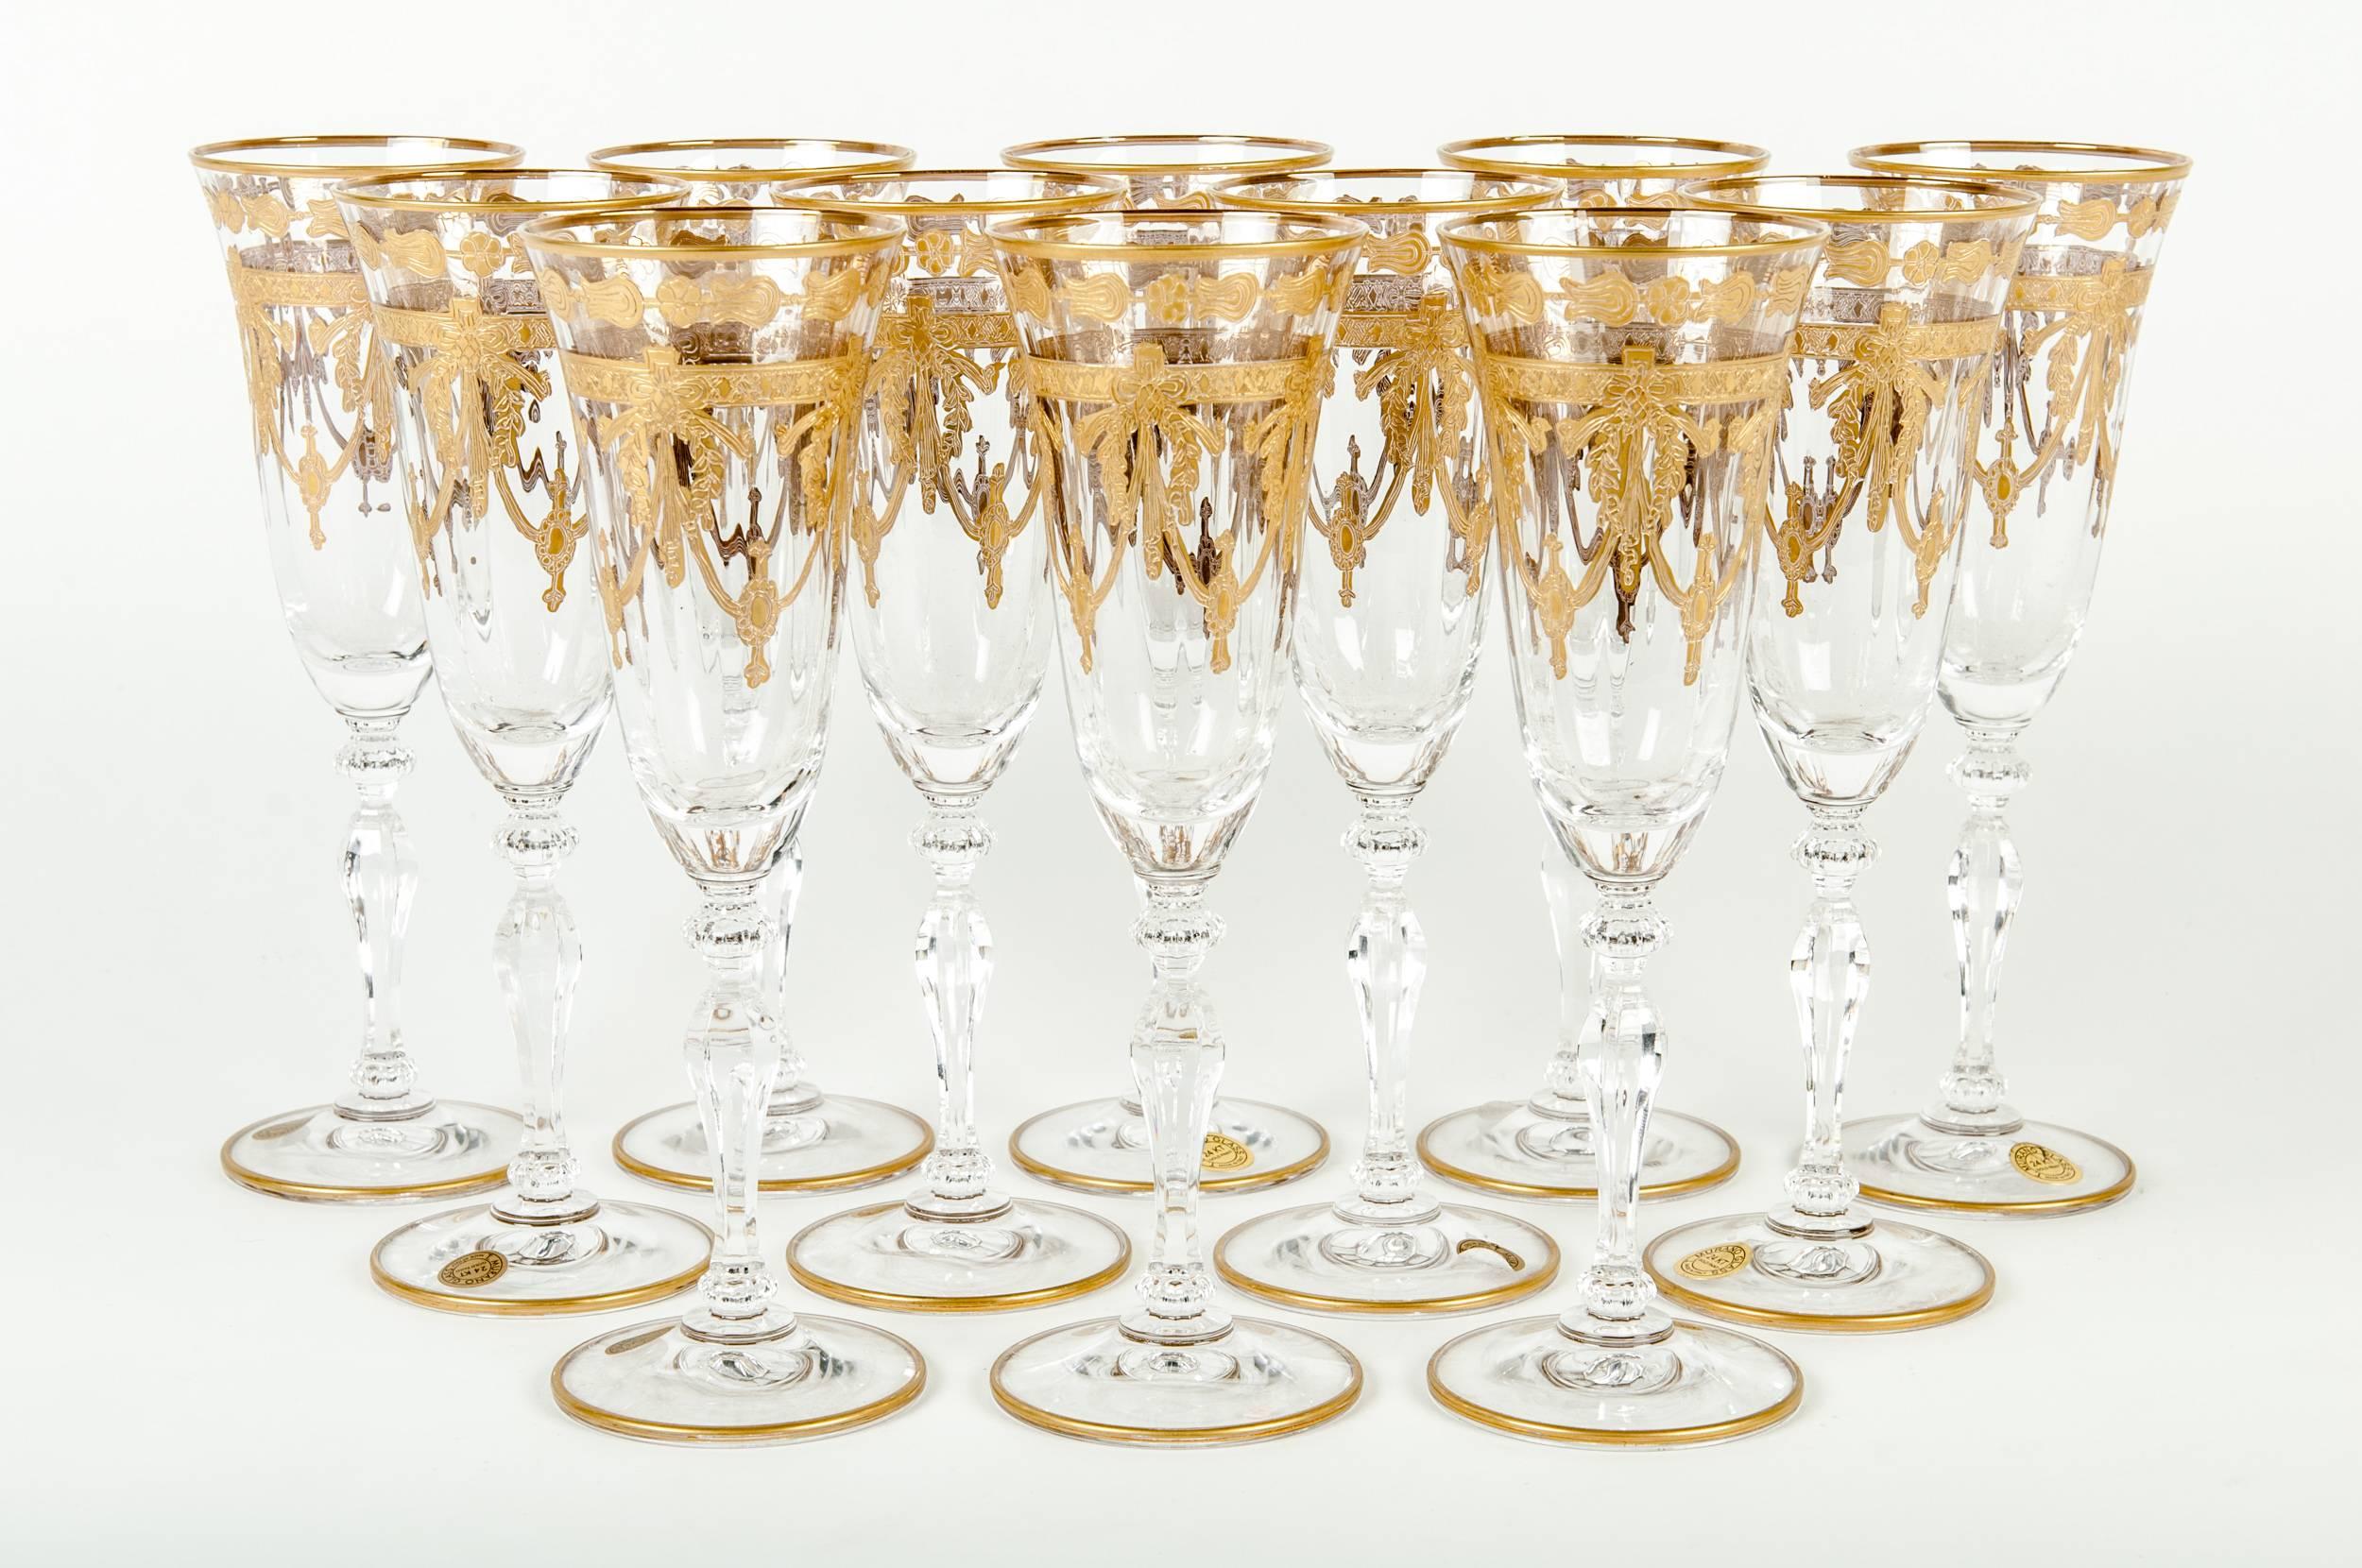 Set of twelve Murano champagne flute with 24-karat gold design. Each champagne flute measure 8.5 inches high x 2.5 inches diameter.